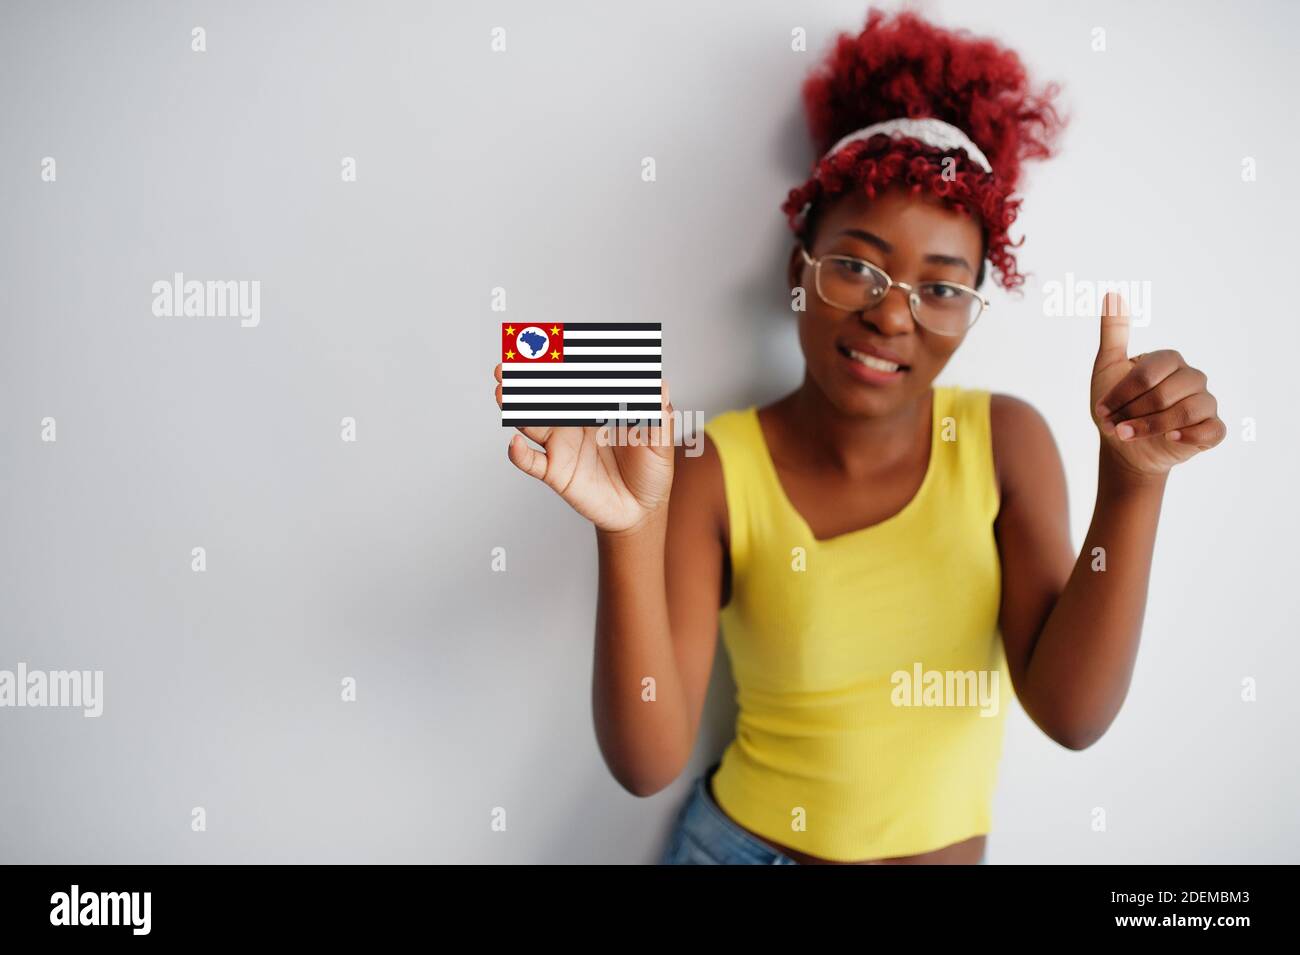 Brazilian woman with afro hair hold Sao Paulo flag isolated on white background, show thumb up. States of Brazil concept. Stock Photo